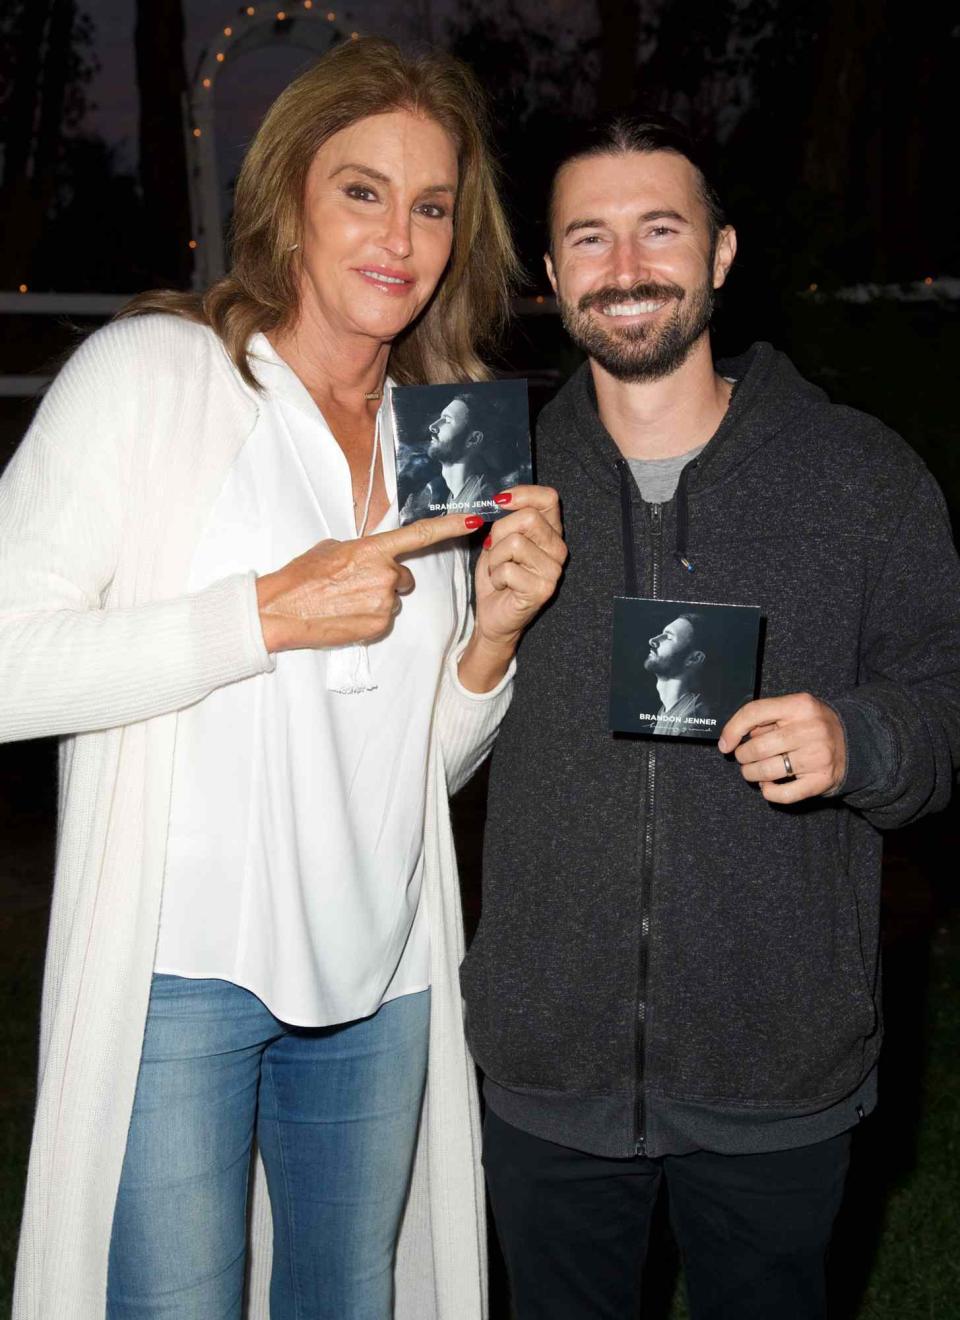 Caitlyn Jenner and Brandon Jenner pose for a photo at the Brandon Jenner Record Release Party For "Burning Ground" on November 19, 2016 in Malibu, California